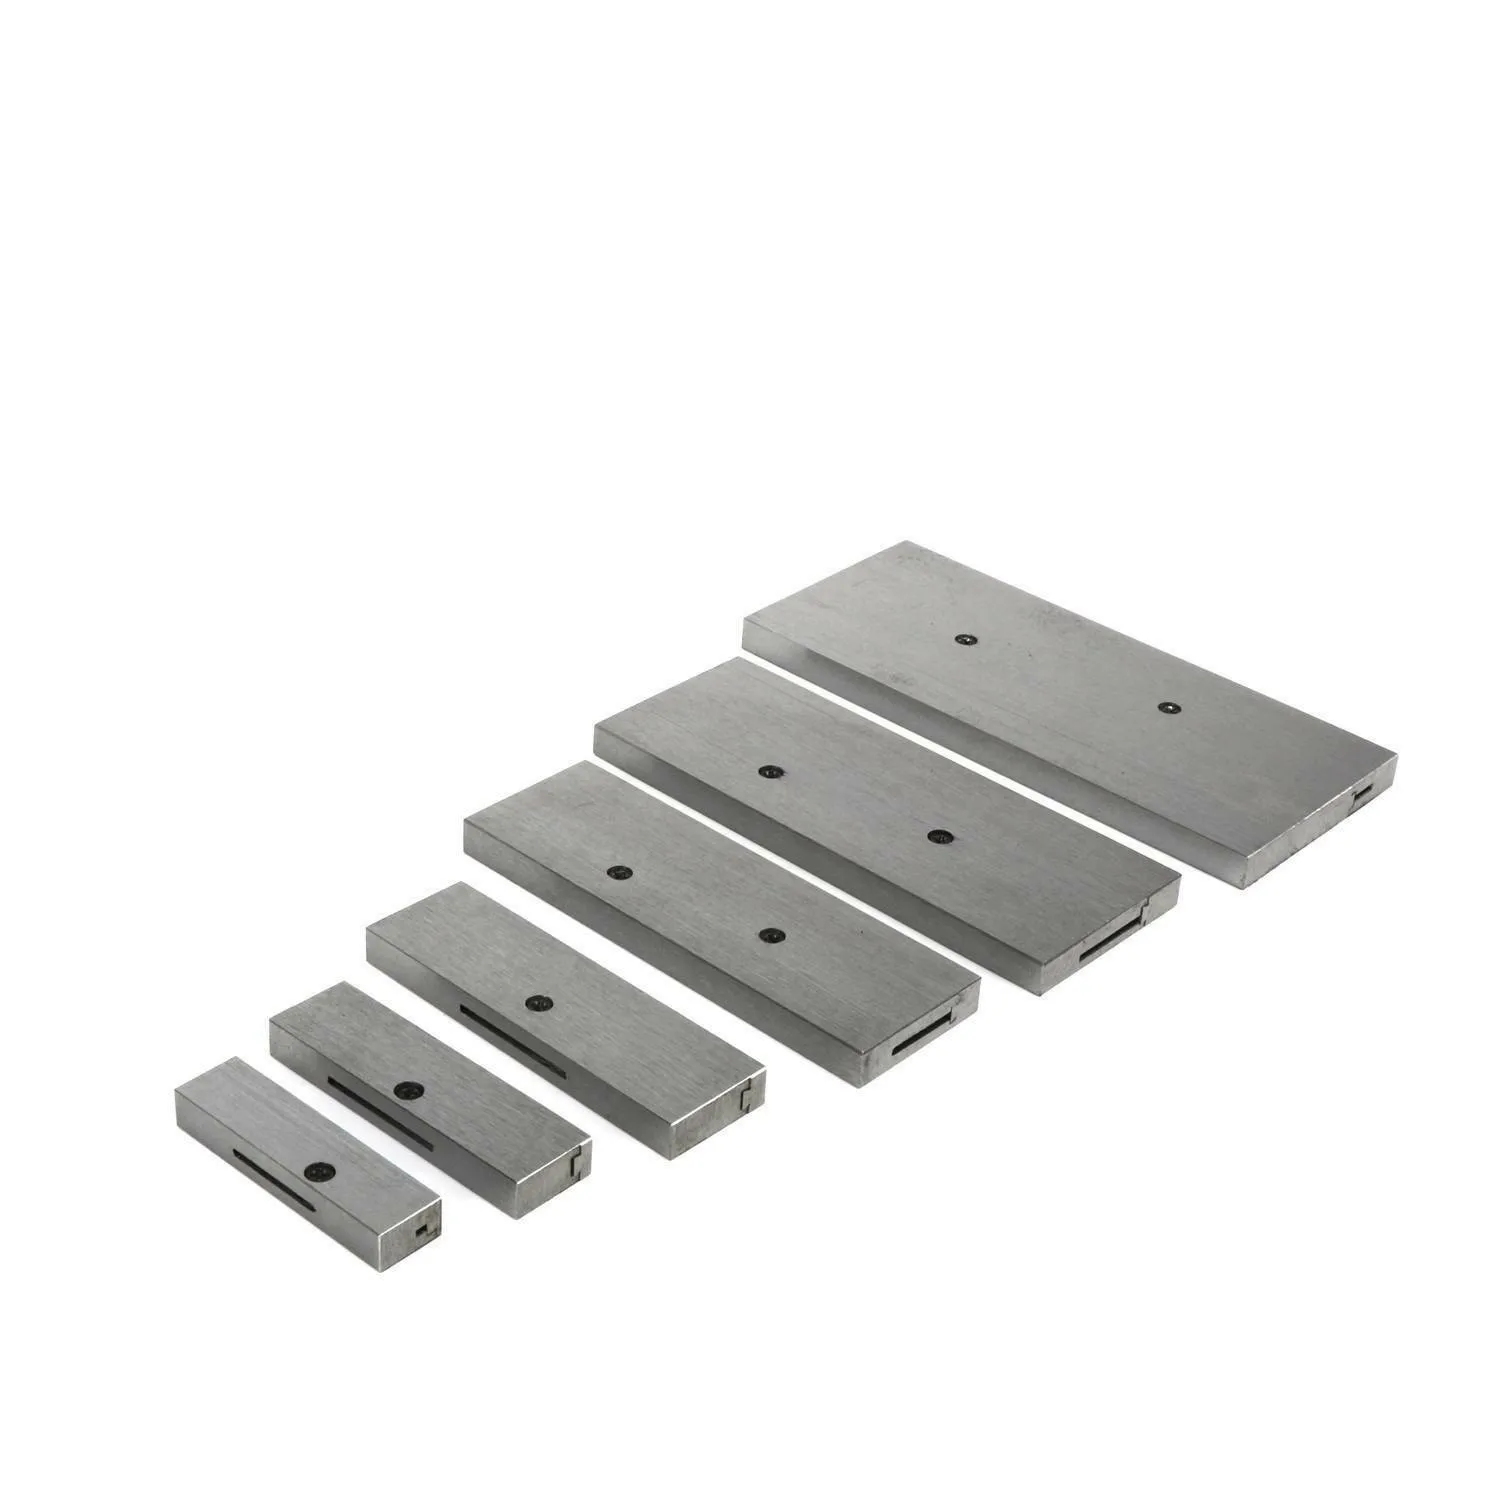 

Achieve Optimum Precision in Your Work with 6Pcs Adjustable Parallel Block Set Covering 3/8 To 2 1/4 Inch Range